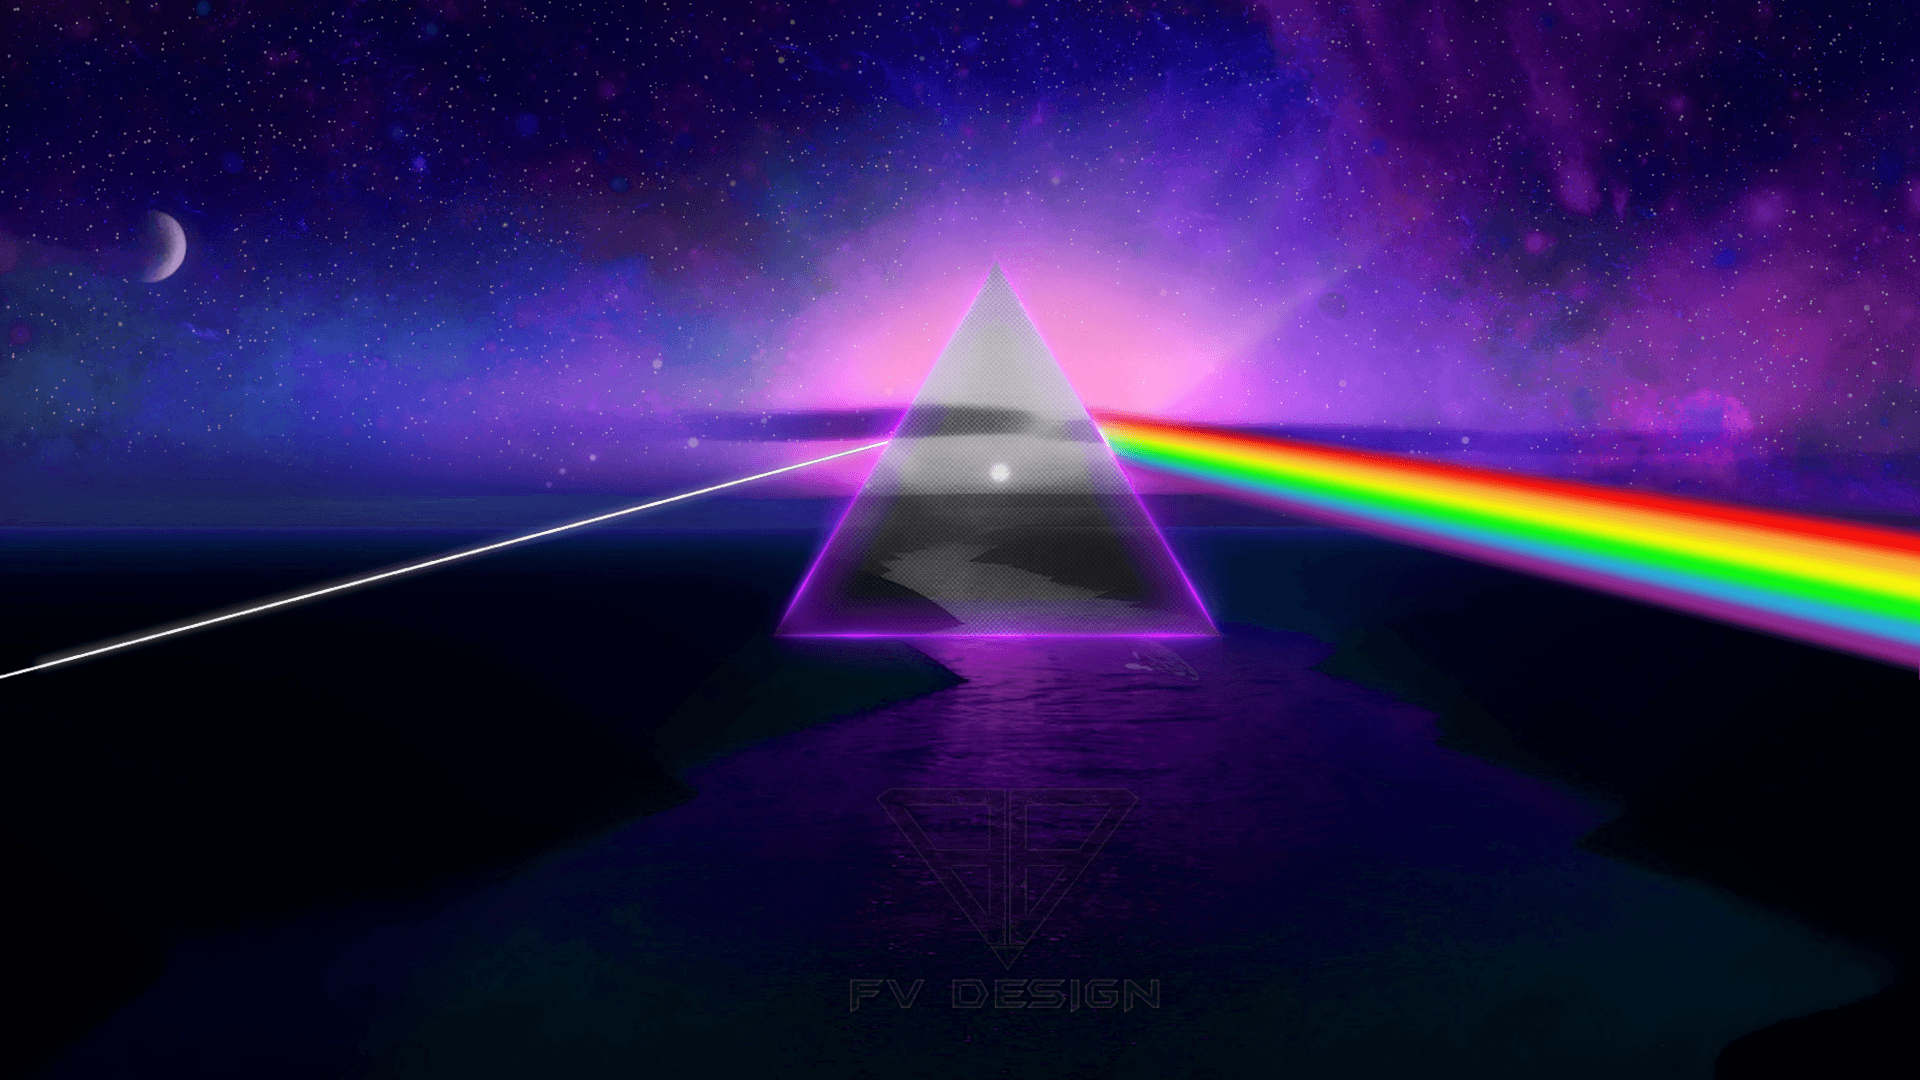 Dark Side Of The Moon Wallpapers - Top Free Dark Side Of The Moon